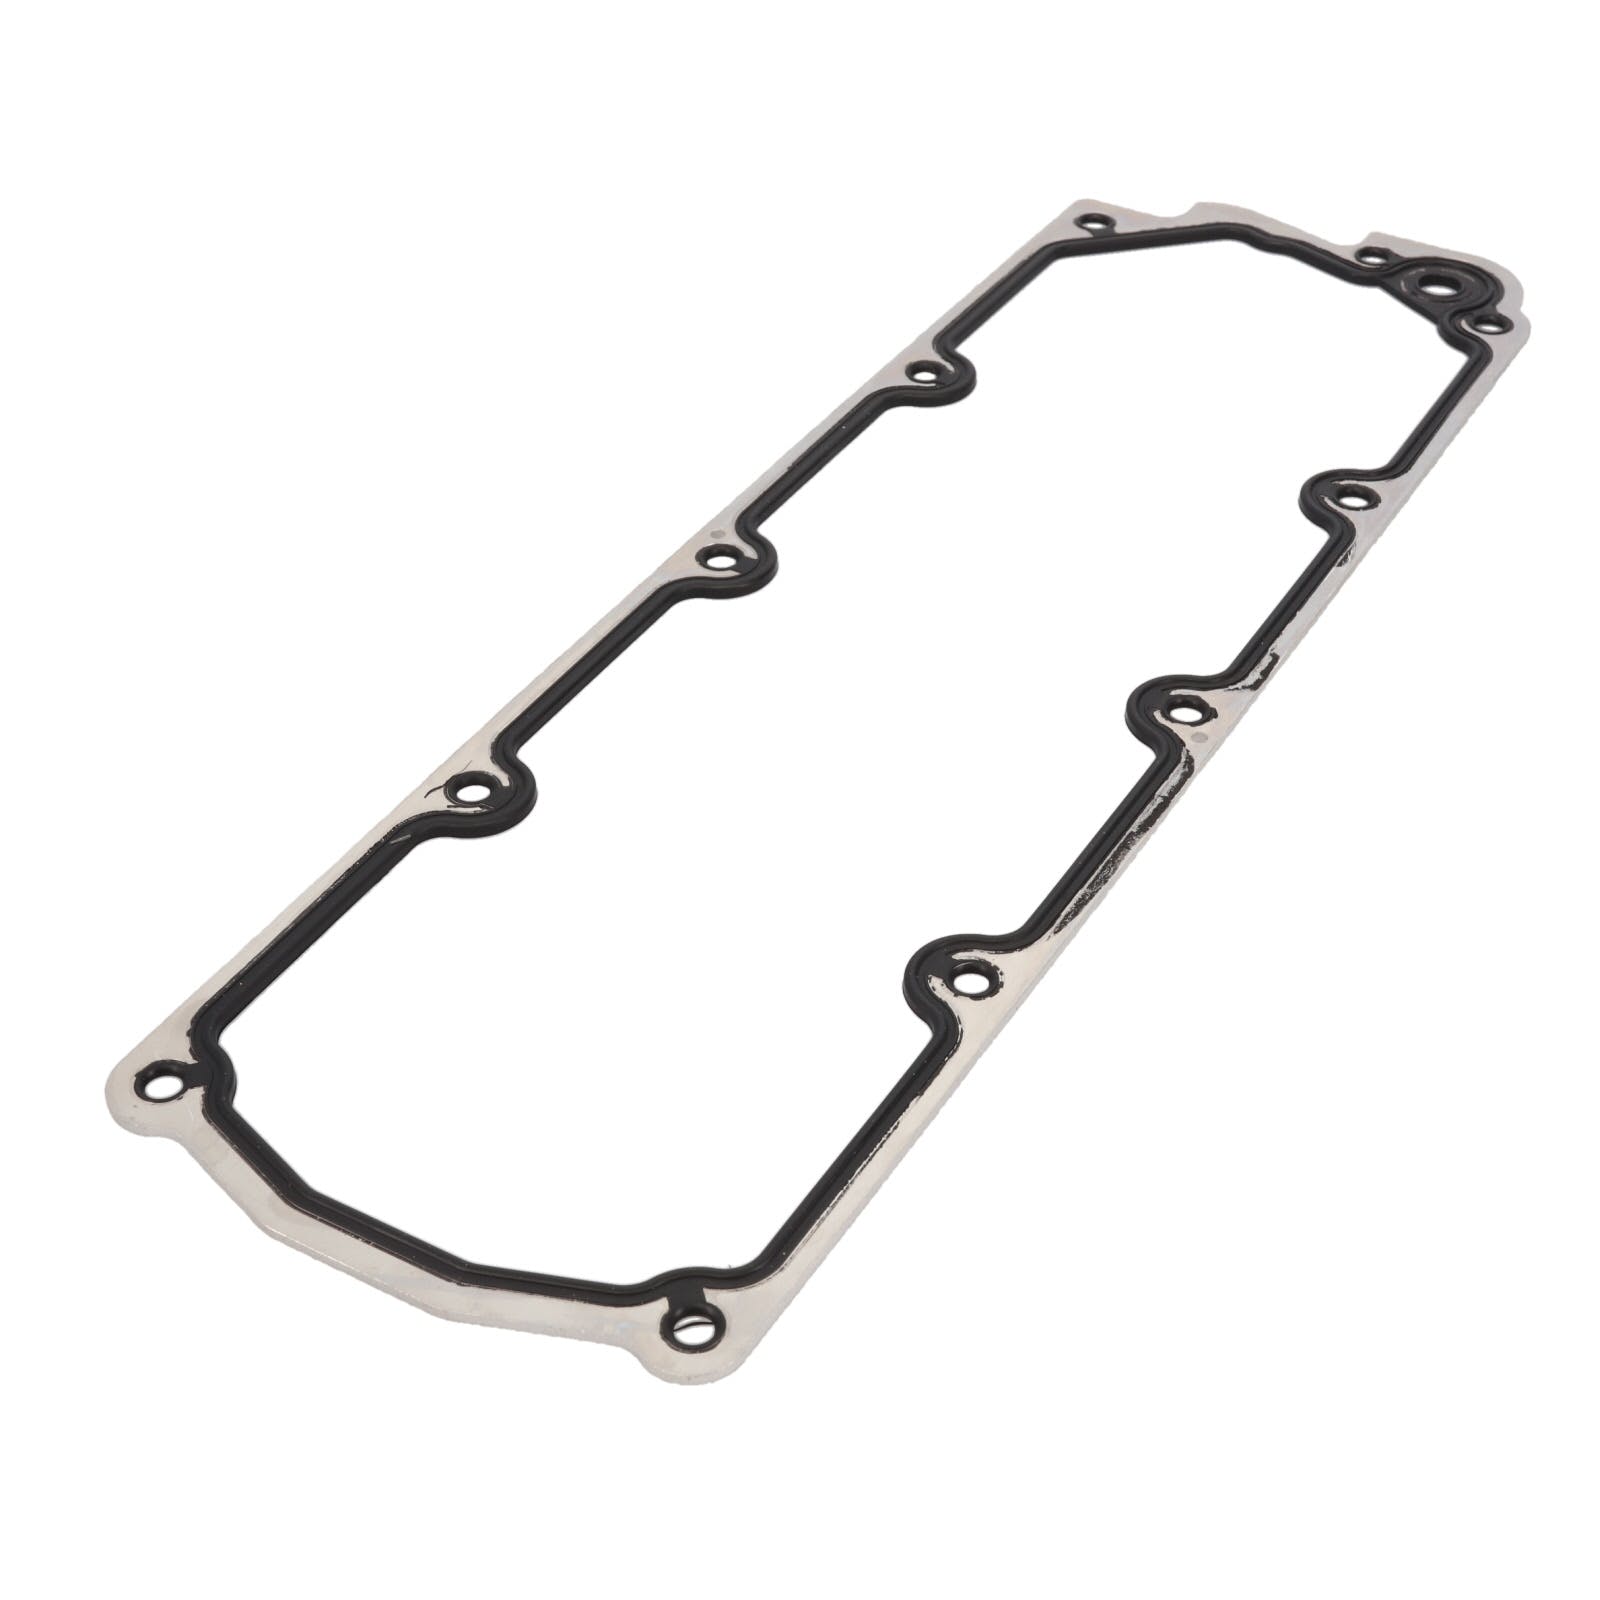 Top Street Performance 81048 Ls2/Ls3/L99 Valley Cover Gasket